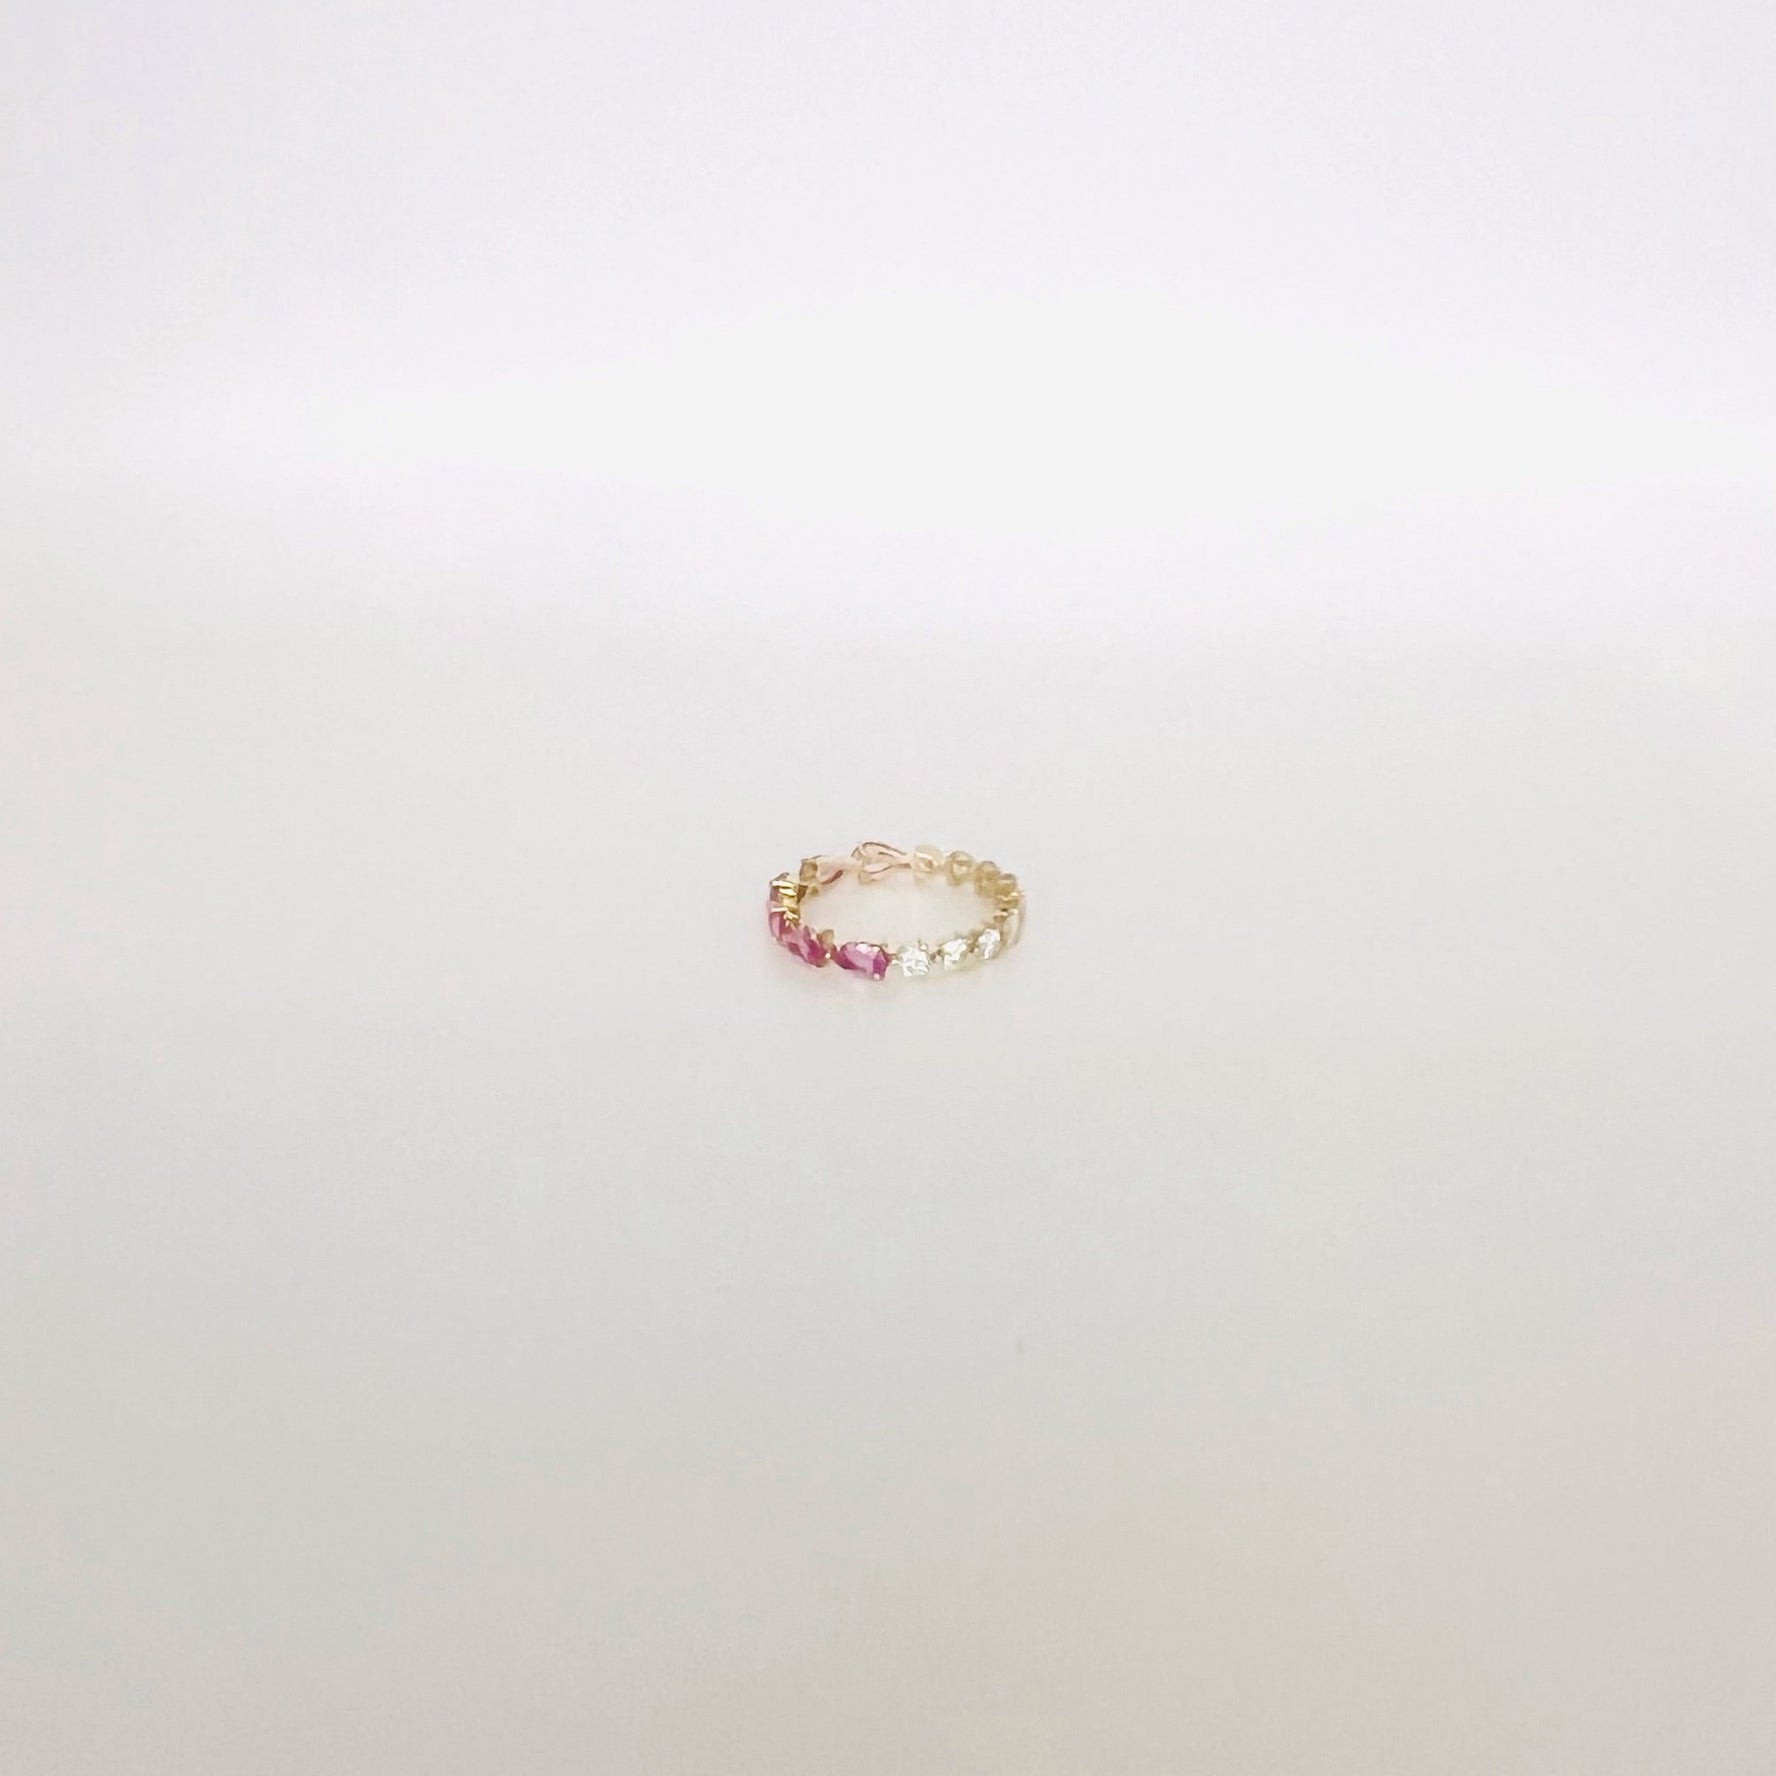 14k gold diamond and pink sapphire ring